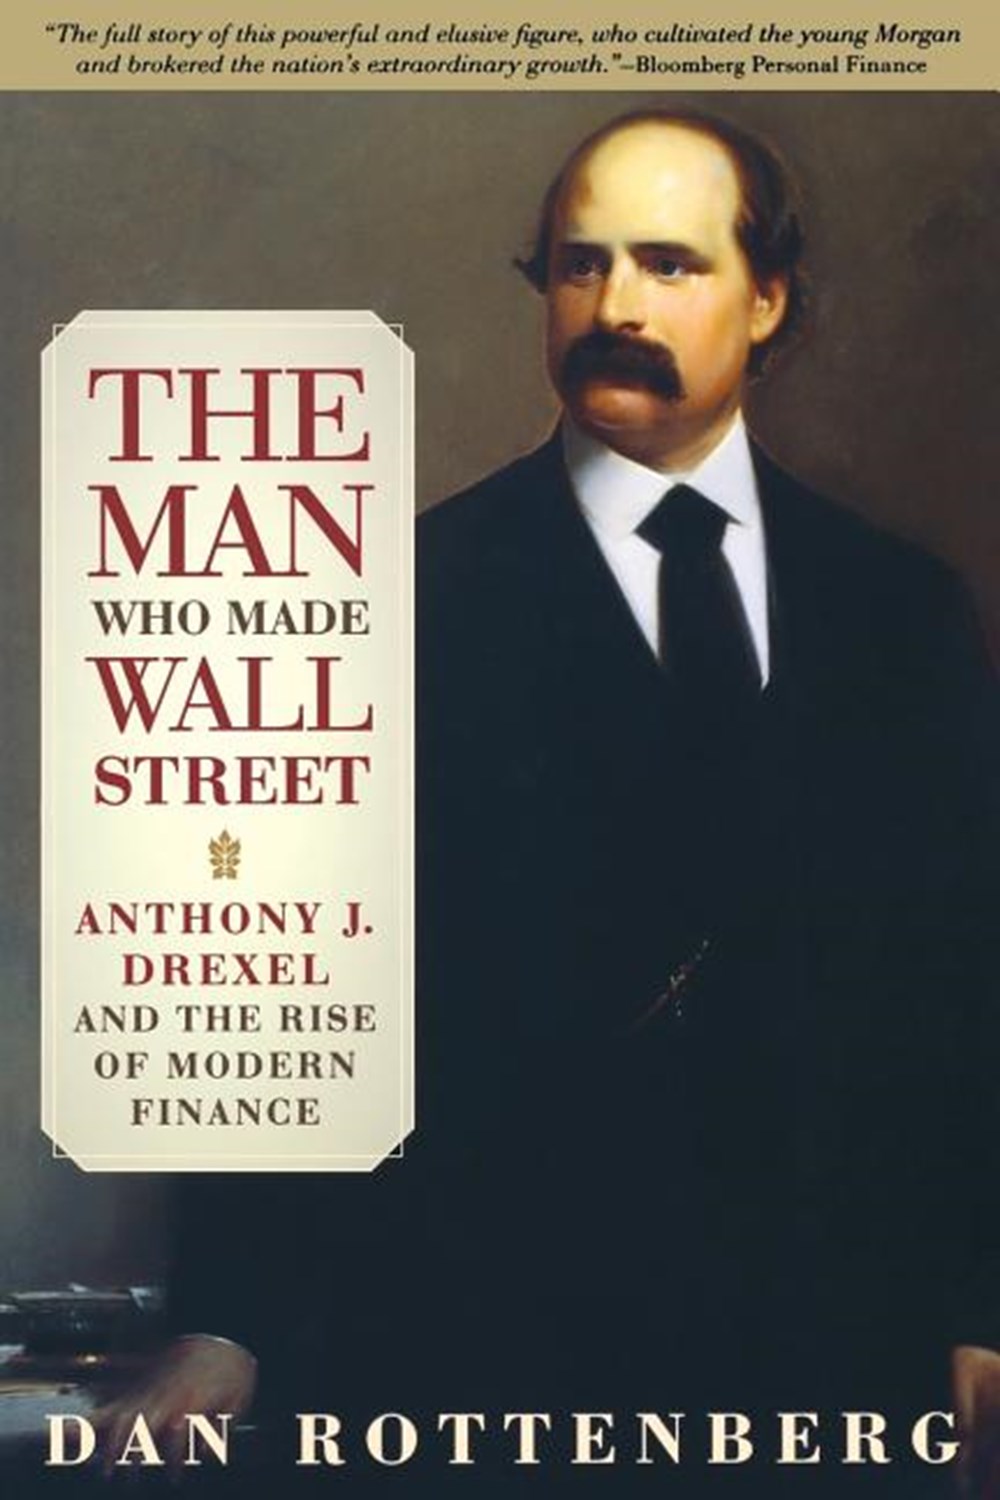 Man Who Made Wall Street: Anthony J. Drexel and the Rise of Modern Finance